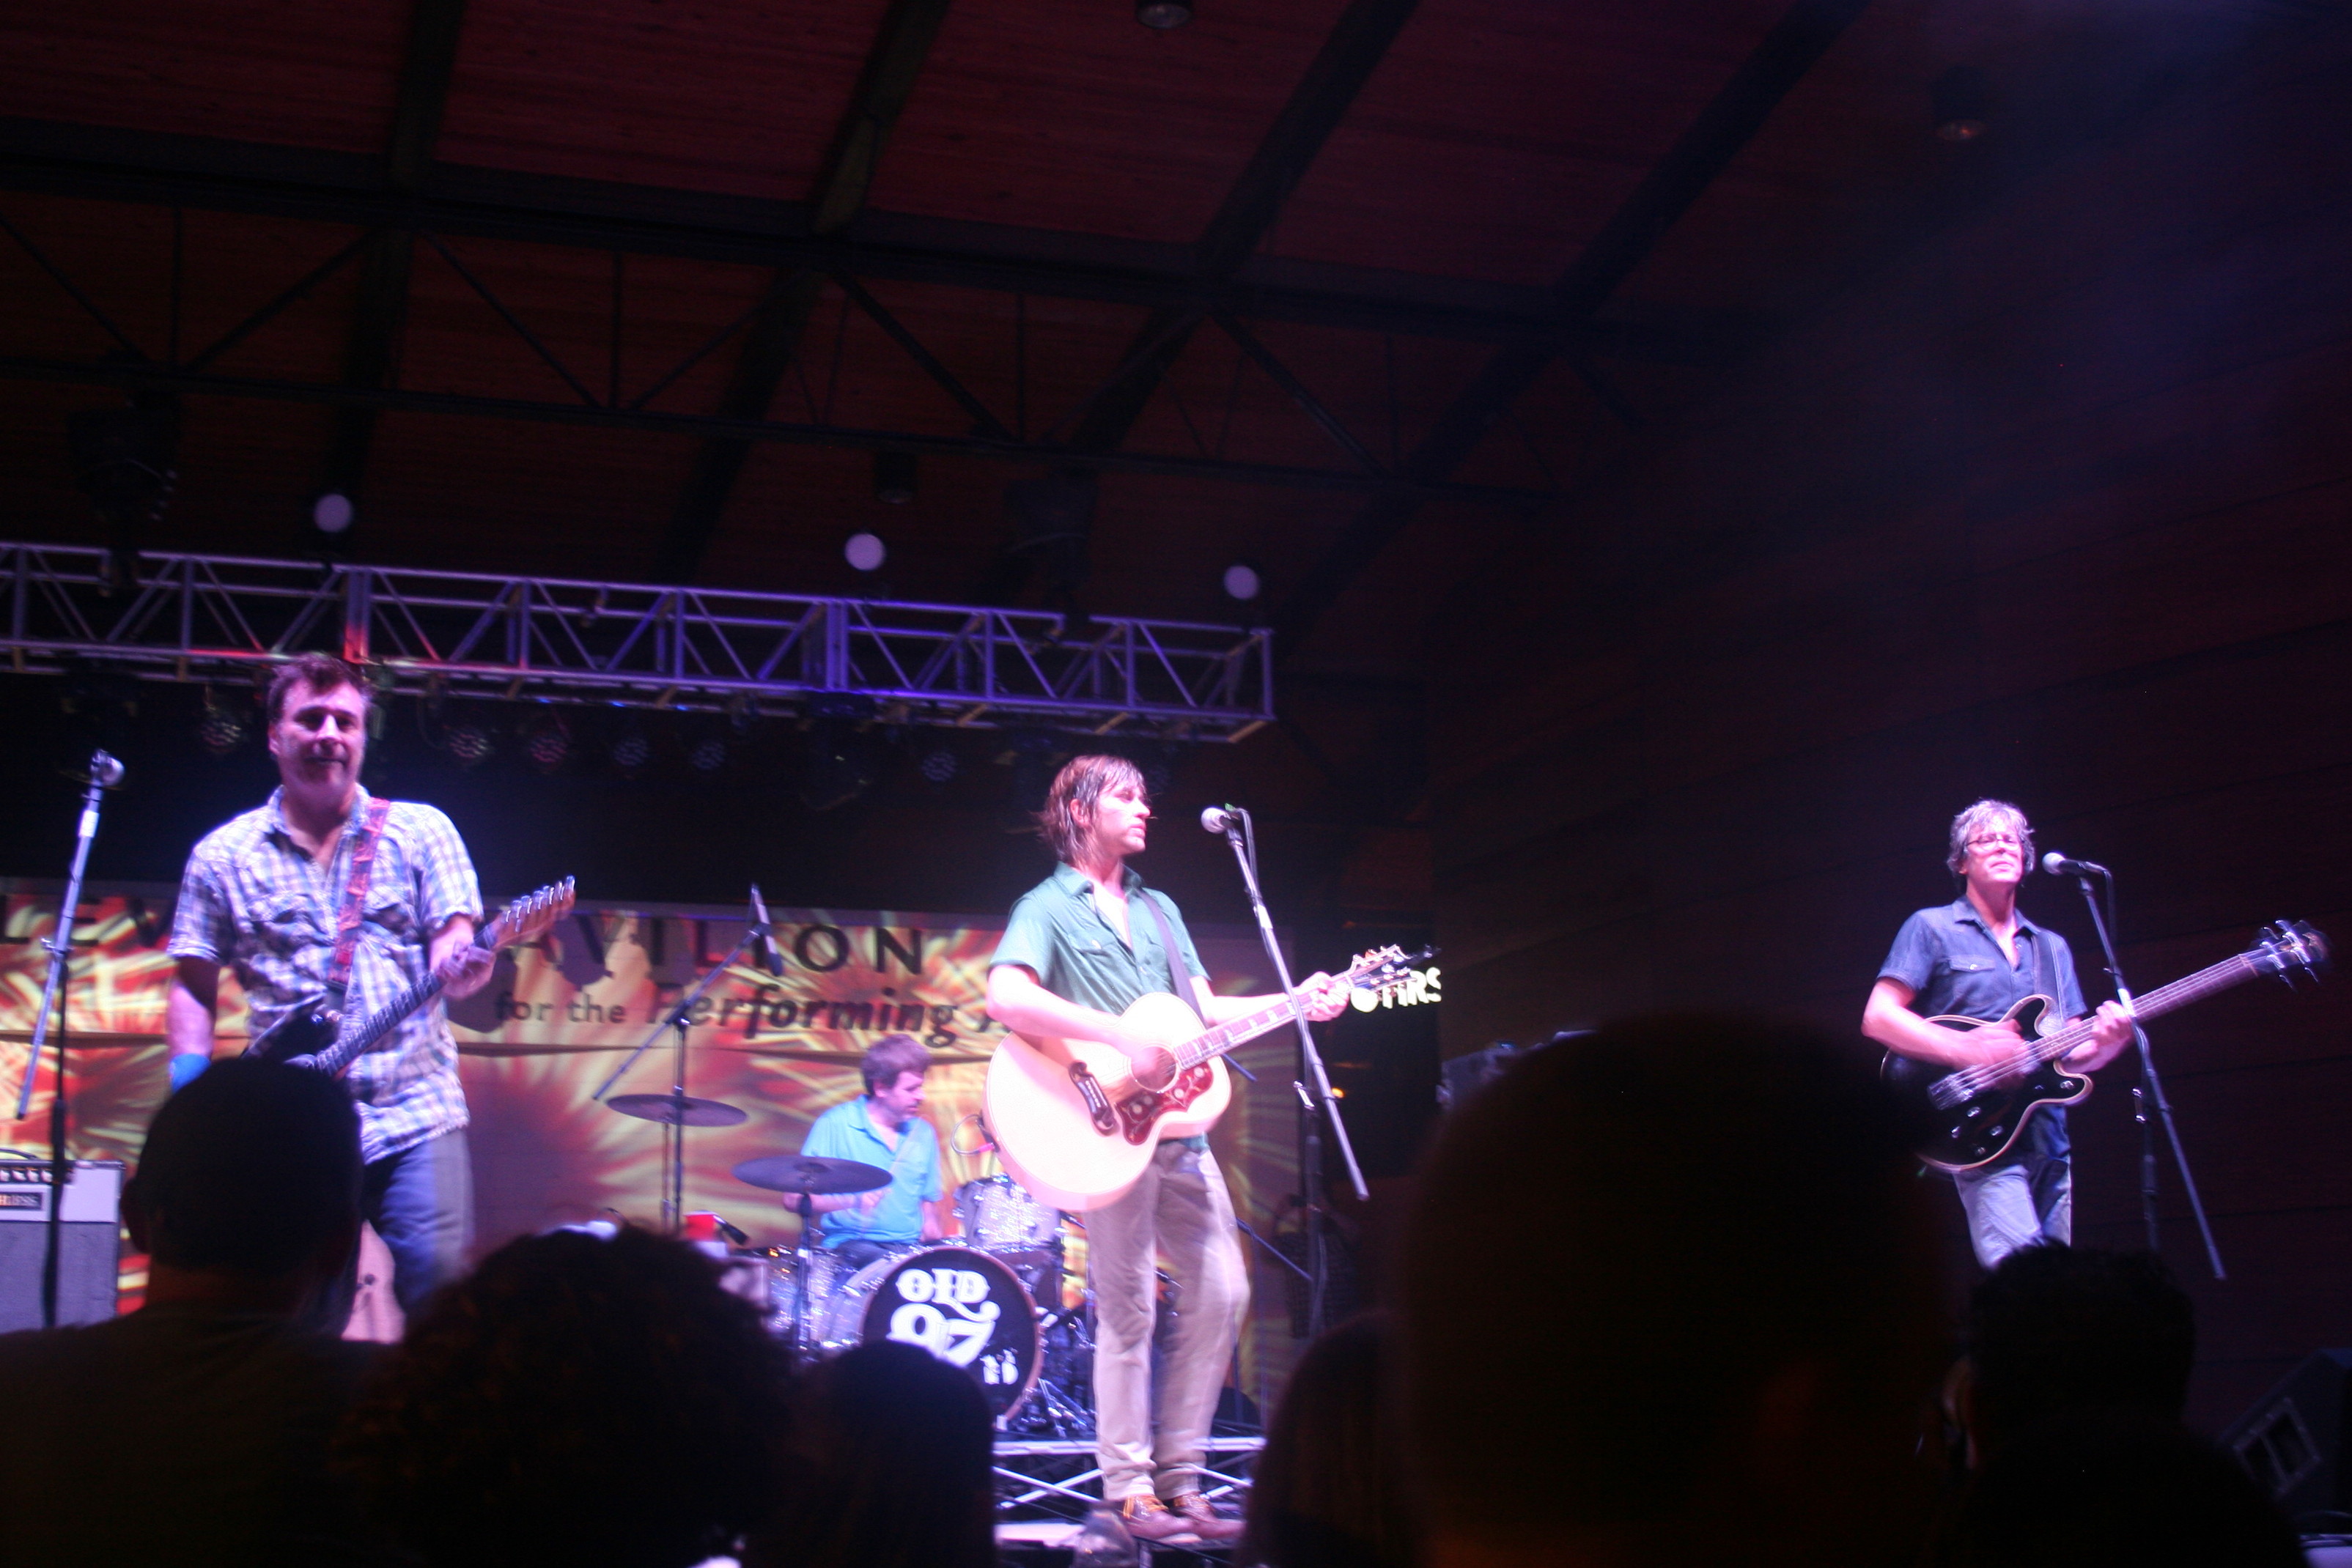 Old 97's performing at the Levitt Pavilion in central Arlington, Texas in 2013